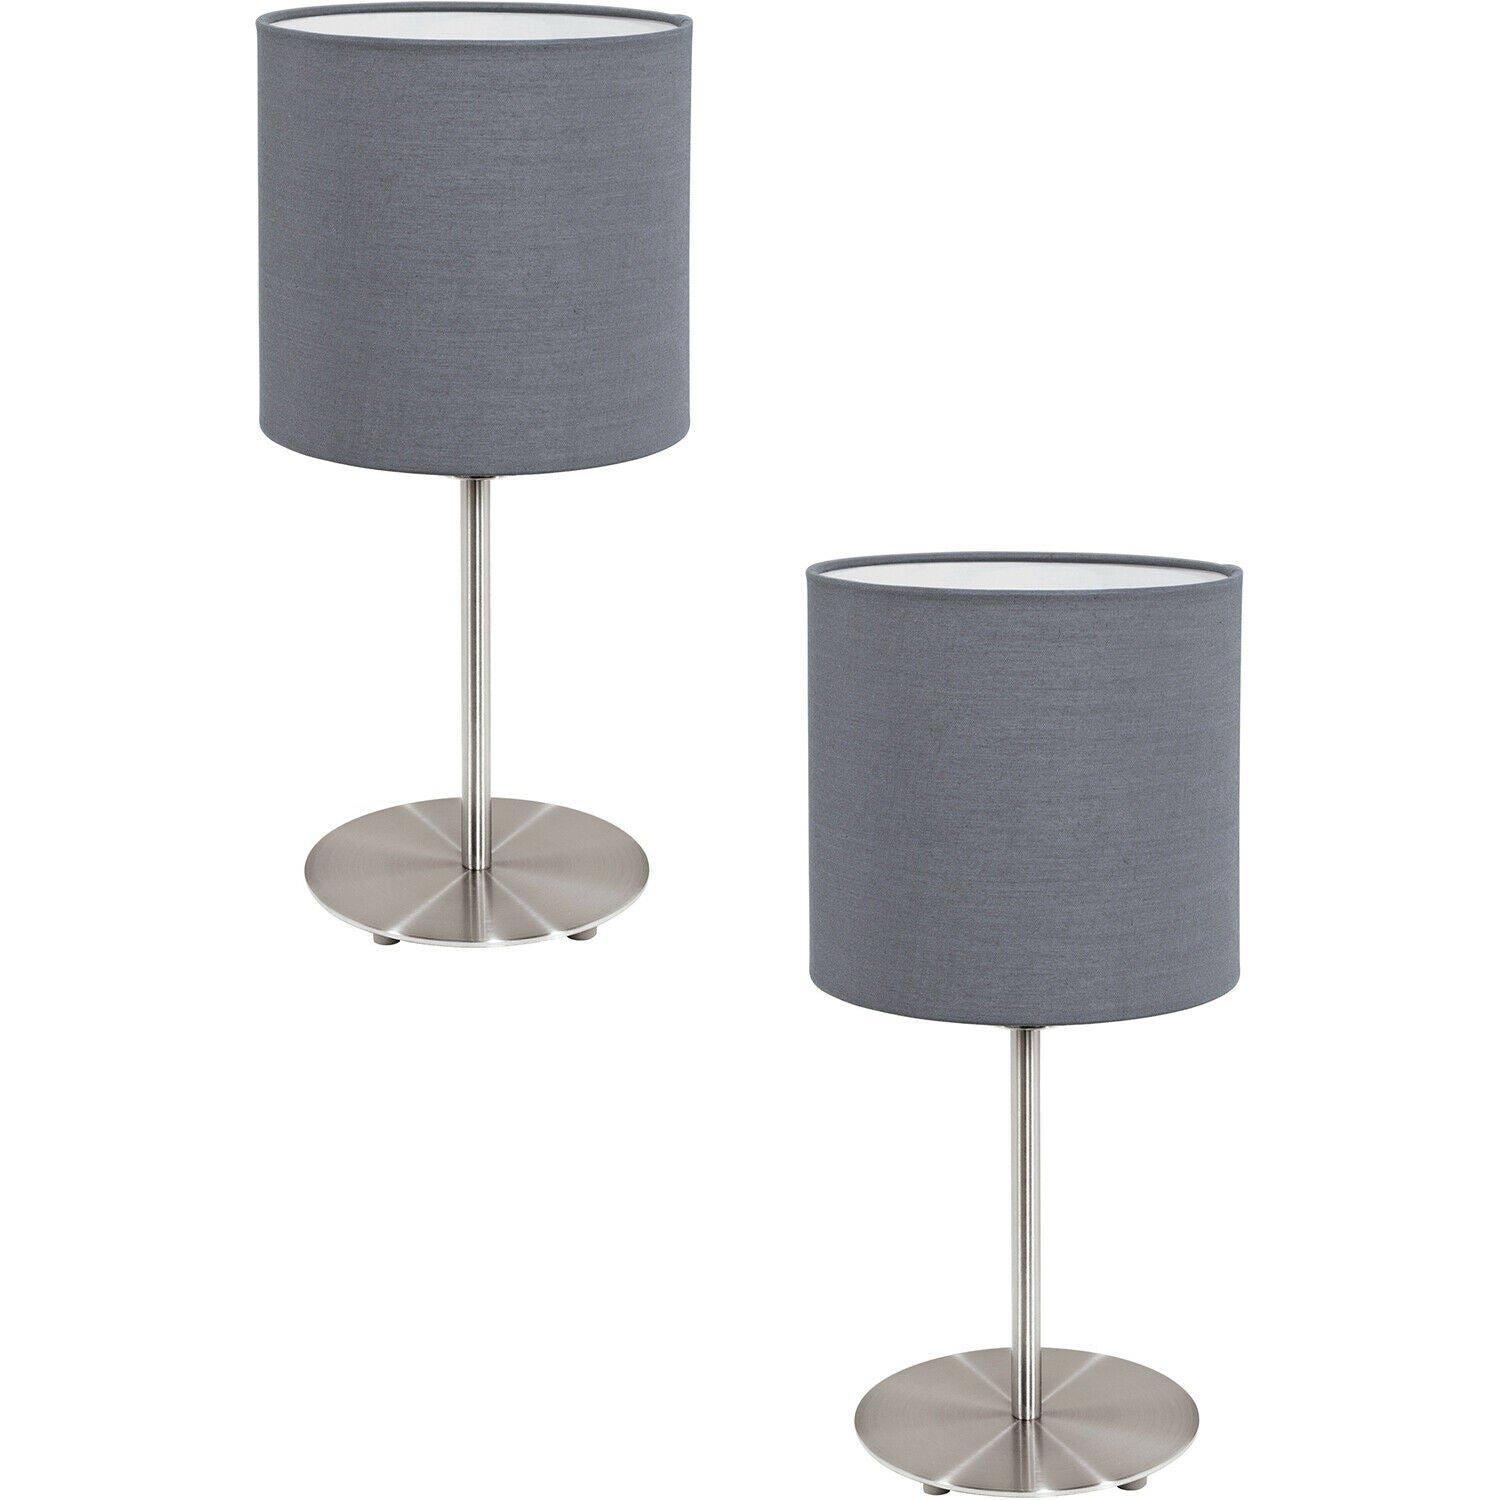 2 PACK Table Desk Lamp Colour Satin Nickel Steel Shade Grey Fabric E27 1x60W